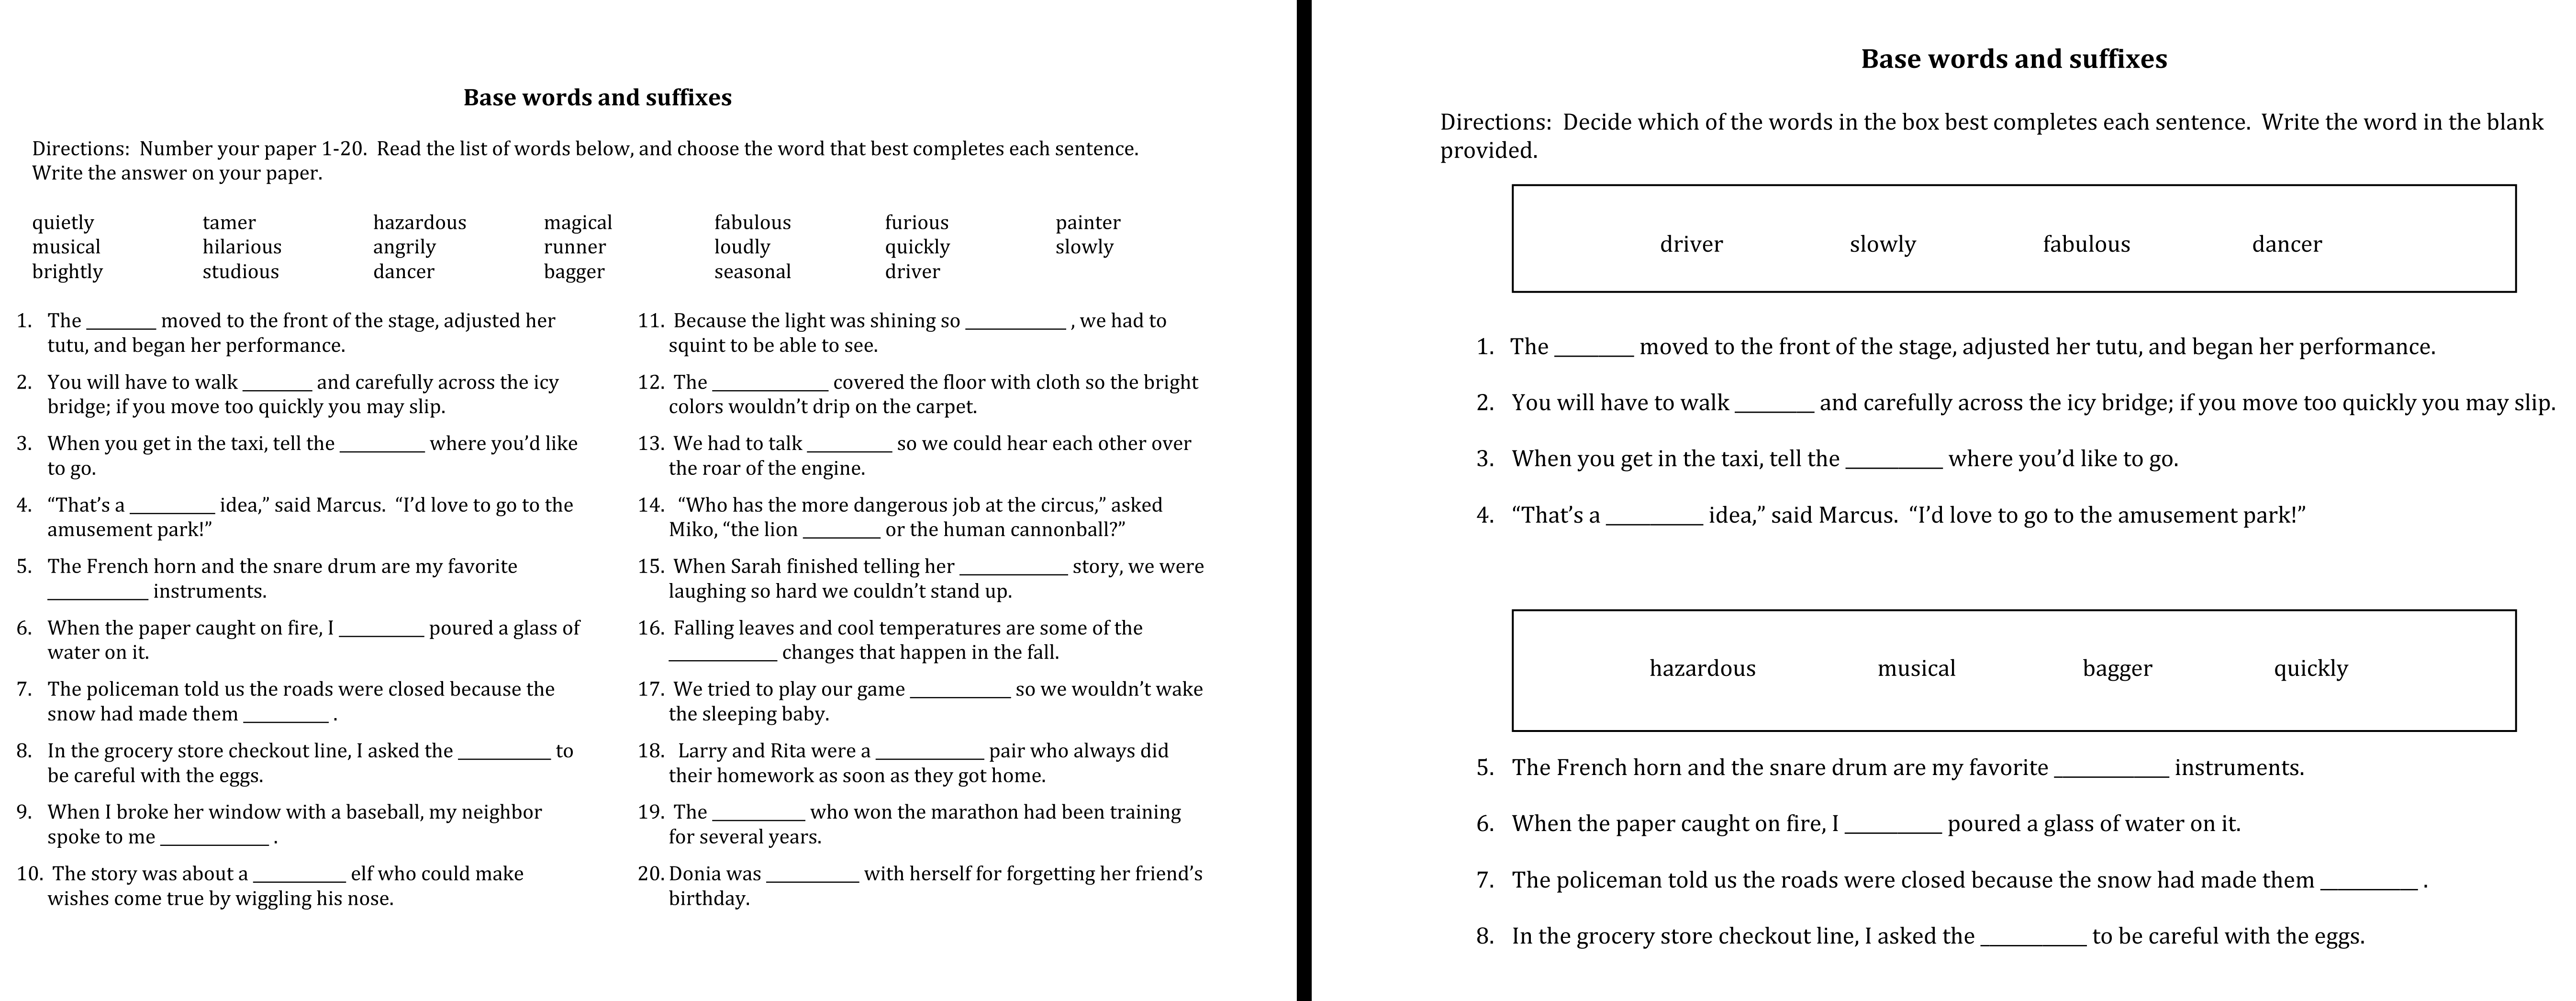 Example Test Questions Image